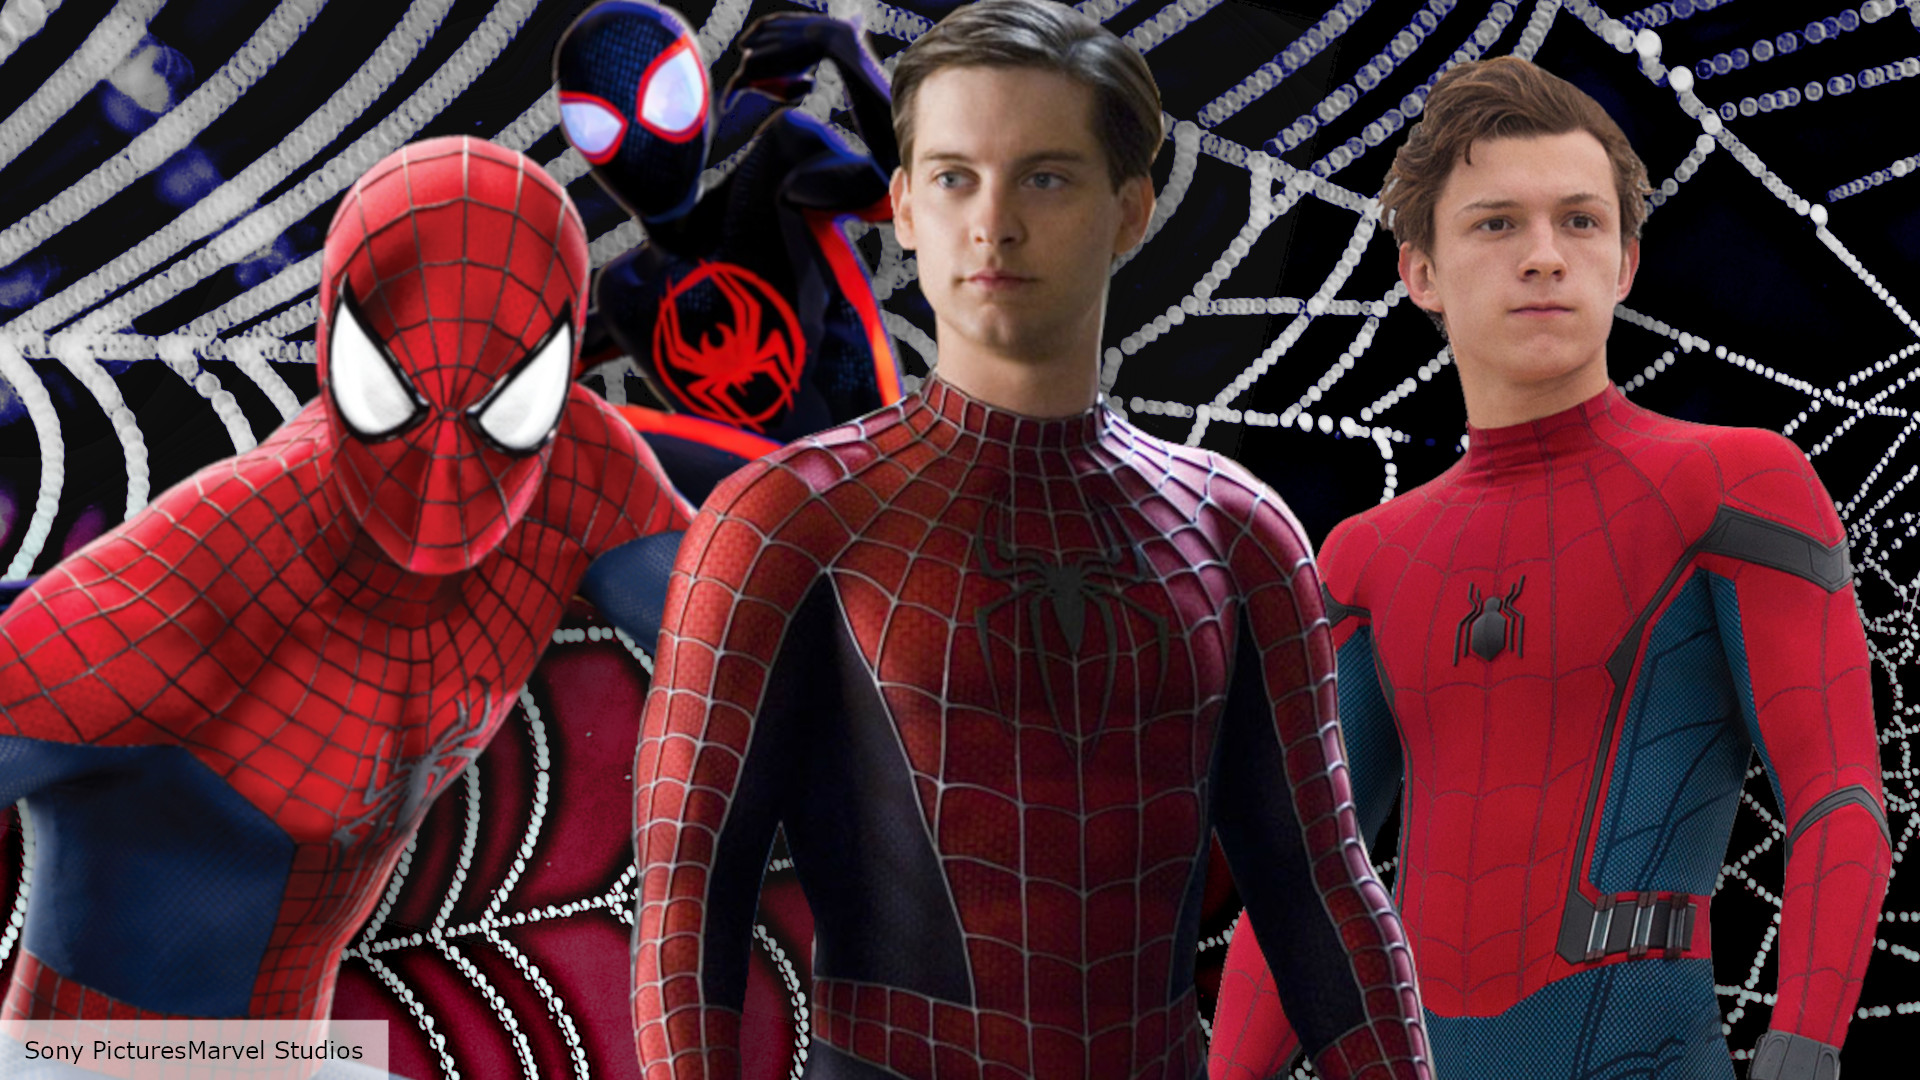 Spider-Man movies in order: How to watch every film